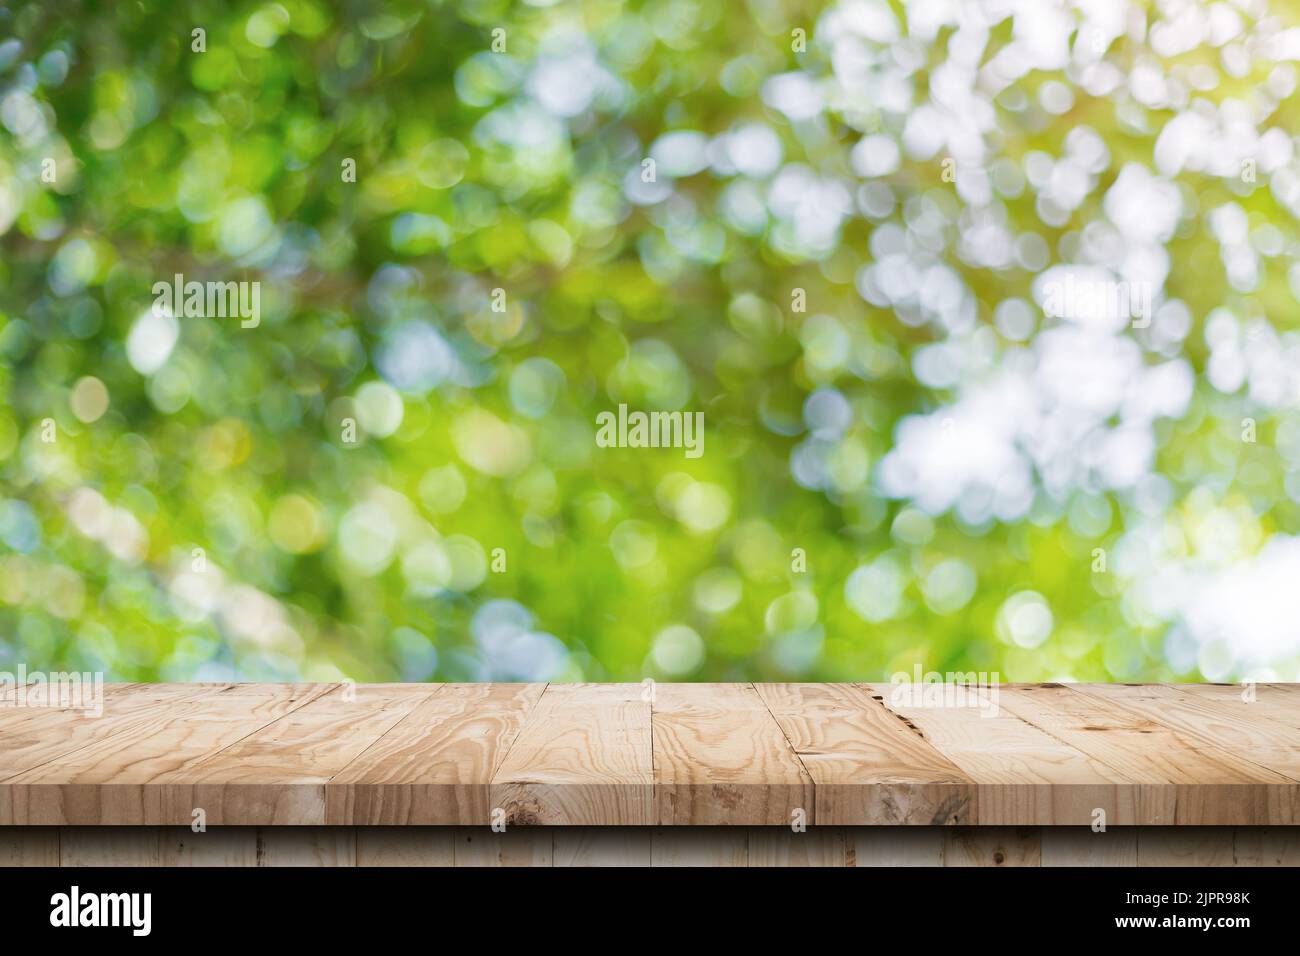 green leaf bokeh blurred and wood table for nature background Stock Photo